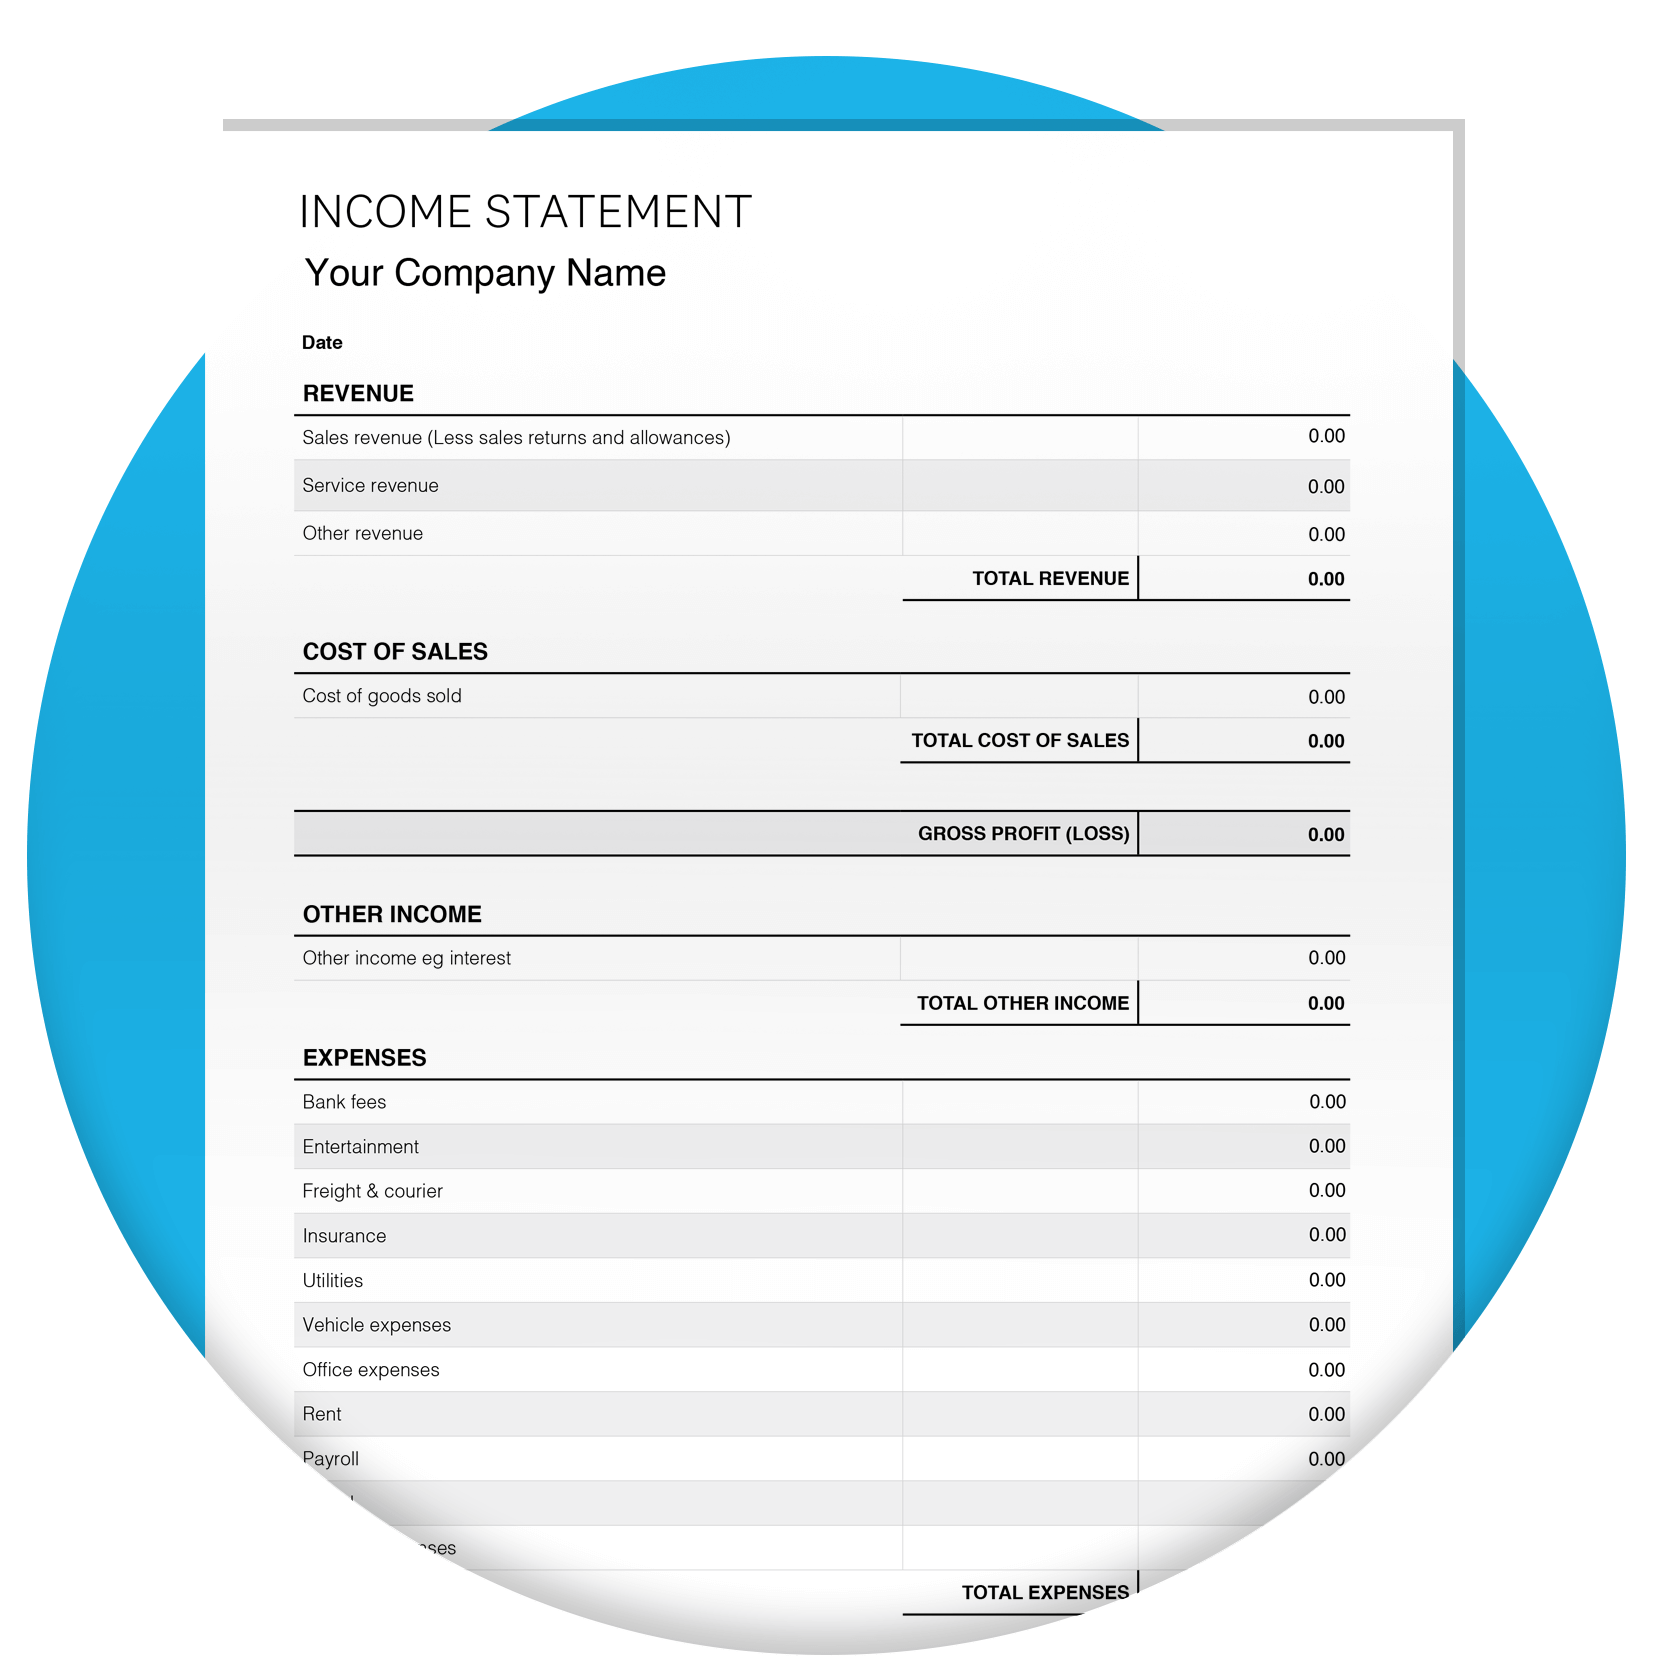 Income statement template with blank fields for users to fill out.